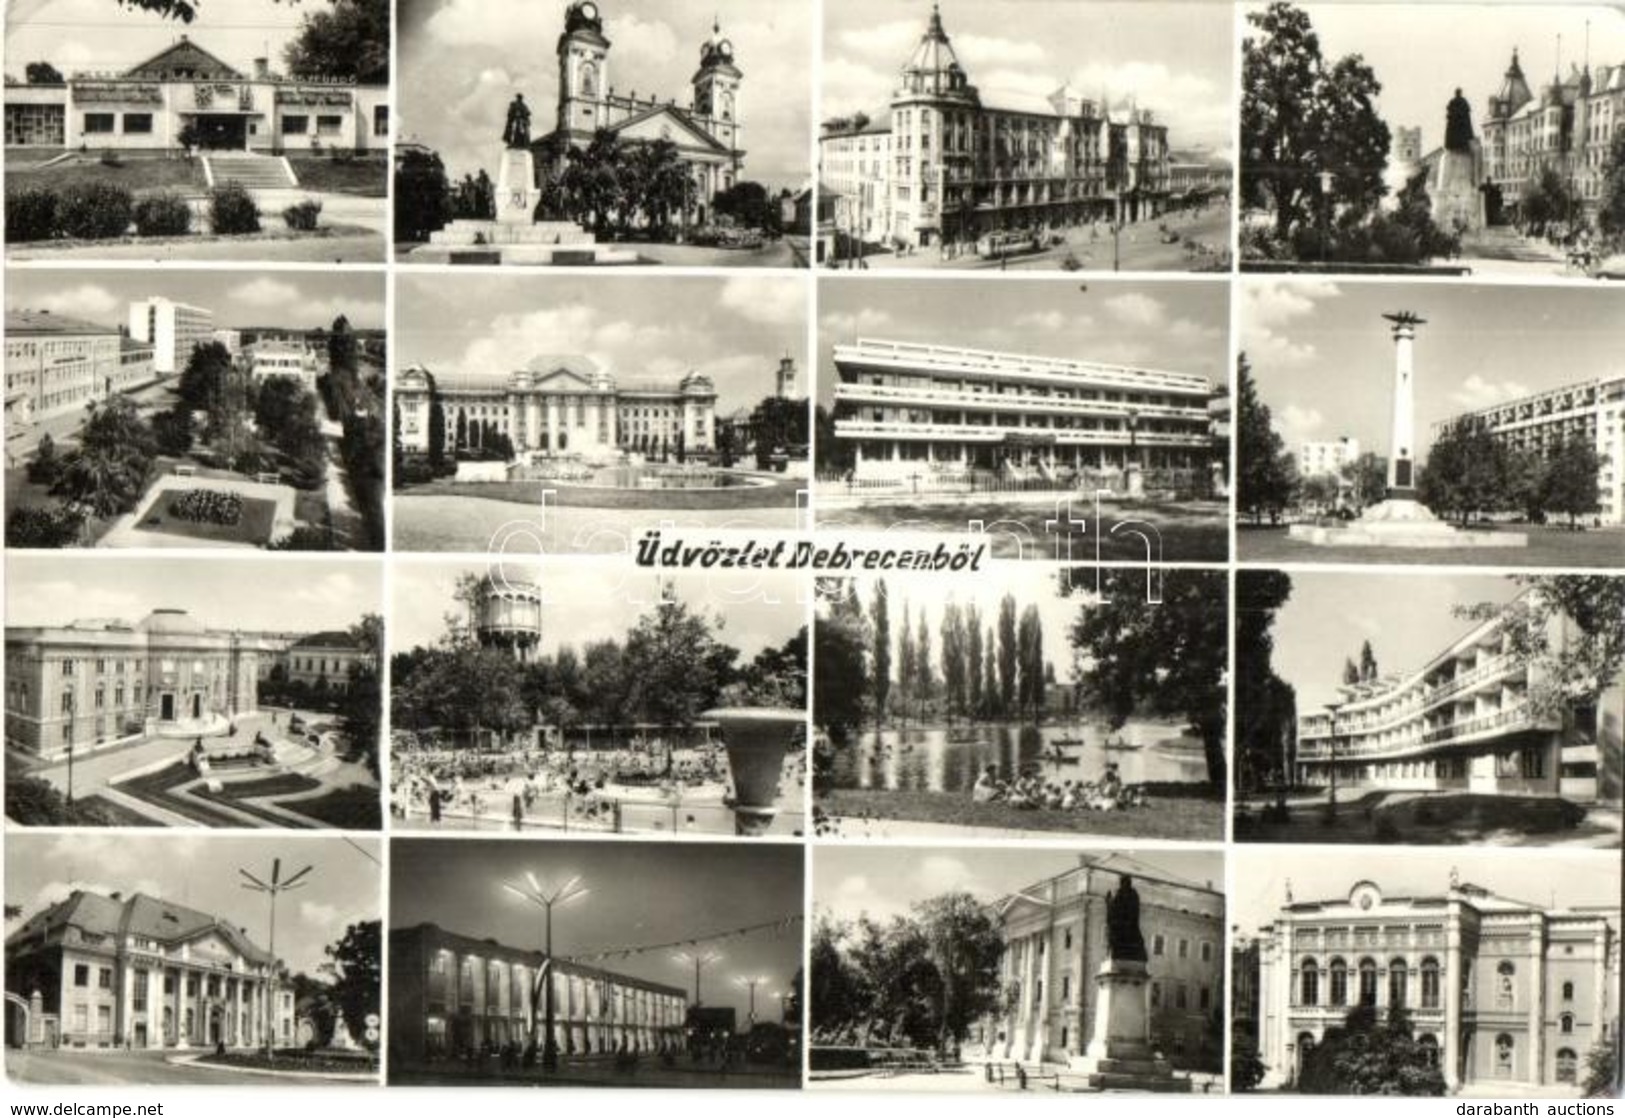 ** * 10 Db MODERN Magyar Varoskepes Lap Autobuszokkal / 10 Modern Hungarian Town-view Postcards With Autobuses - Unclassified